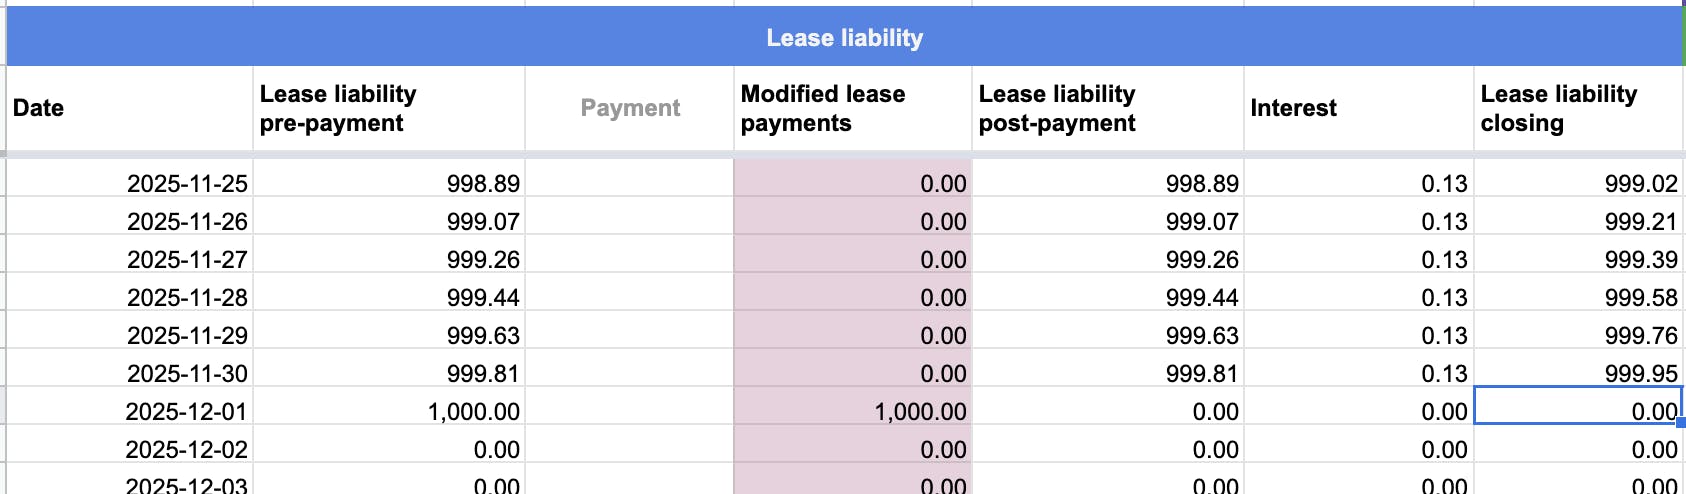 Always ensuring the lease liability unwinds to zero after modification is crucial to getting the calculations correct